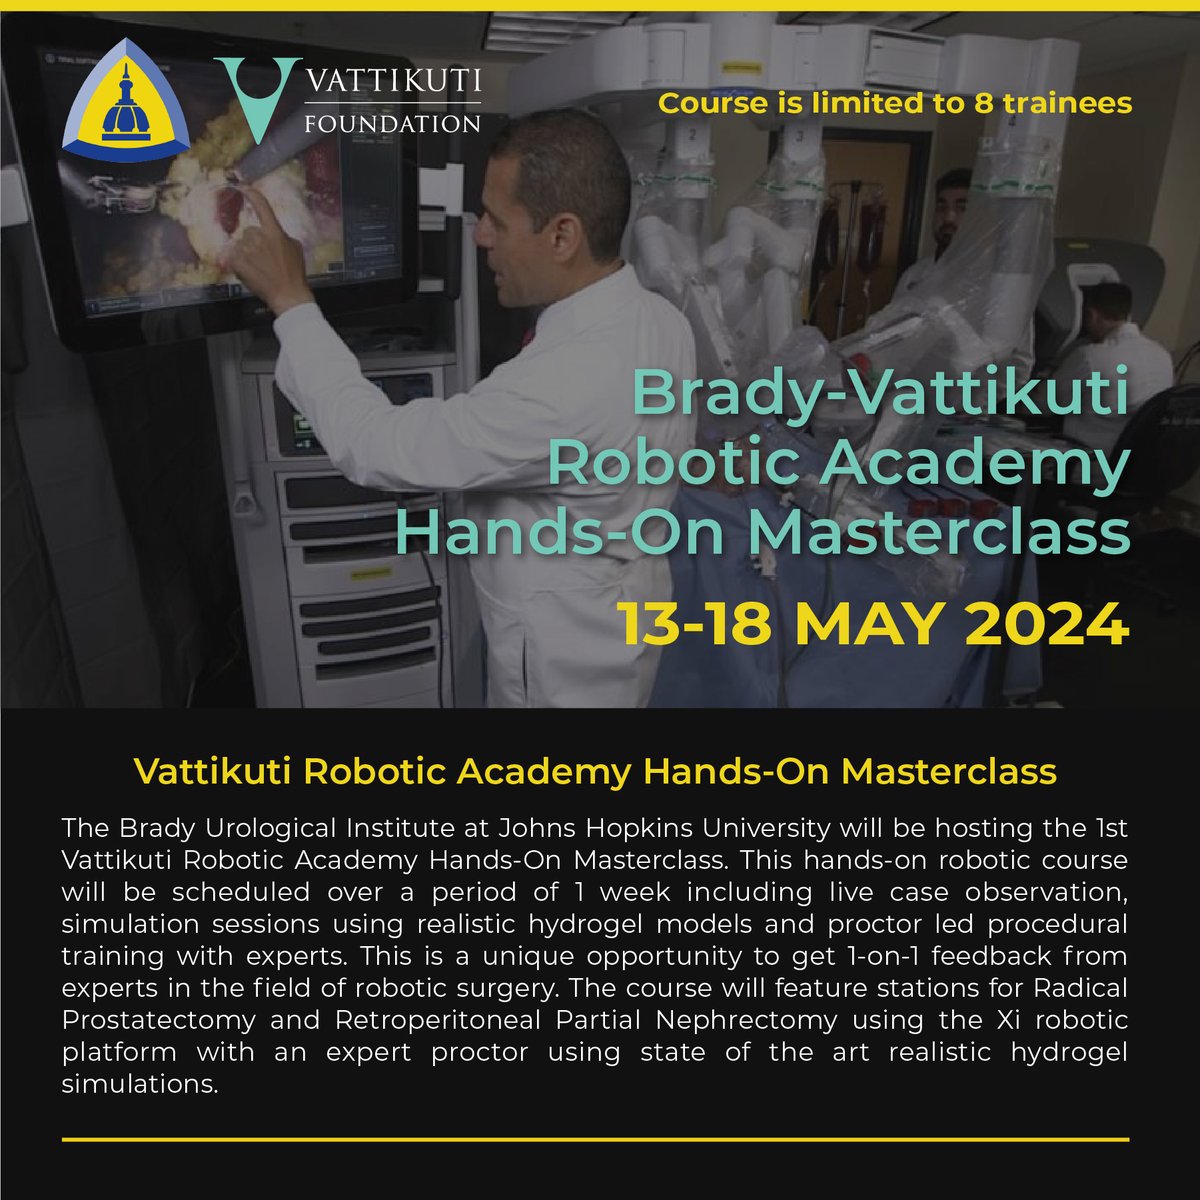 Have you ever used a hands-on robotic simulator to learn how to perform a radical prostatectomy? Have you ever used a 3D model to practice a partial nephrectomy? Now is your chance to learn from the experts in the field at the inaugural Brady-Vattikuti Robotic Academy Hands-On…